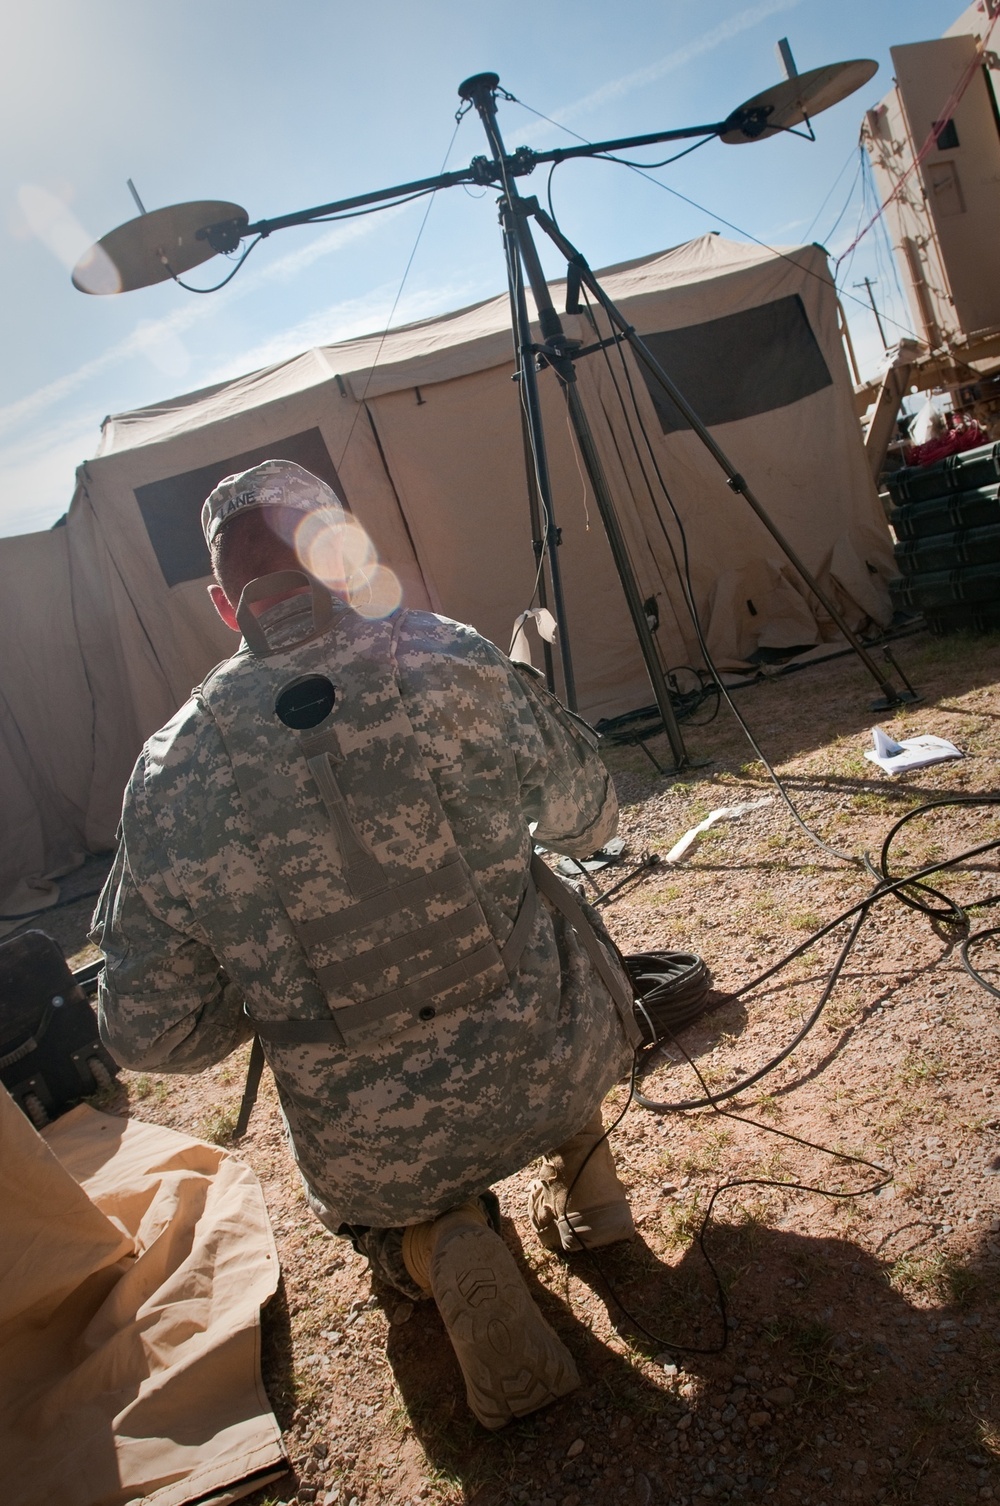 New technology helps soldiers talk to aircraft